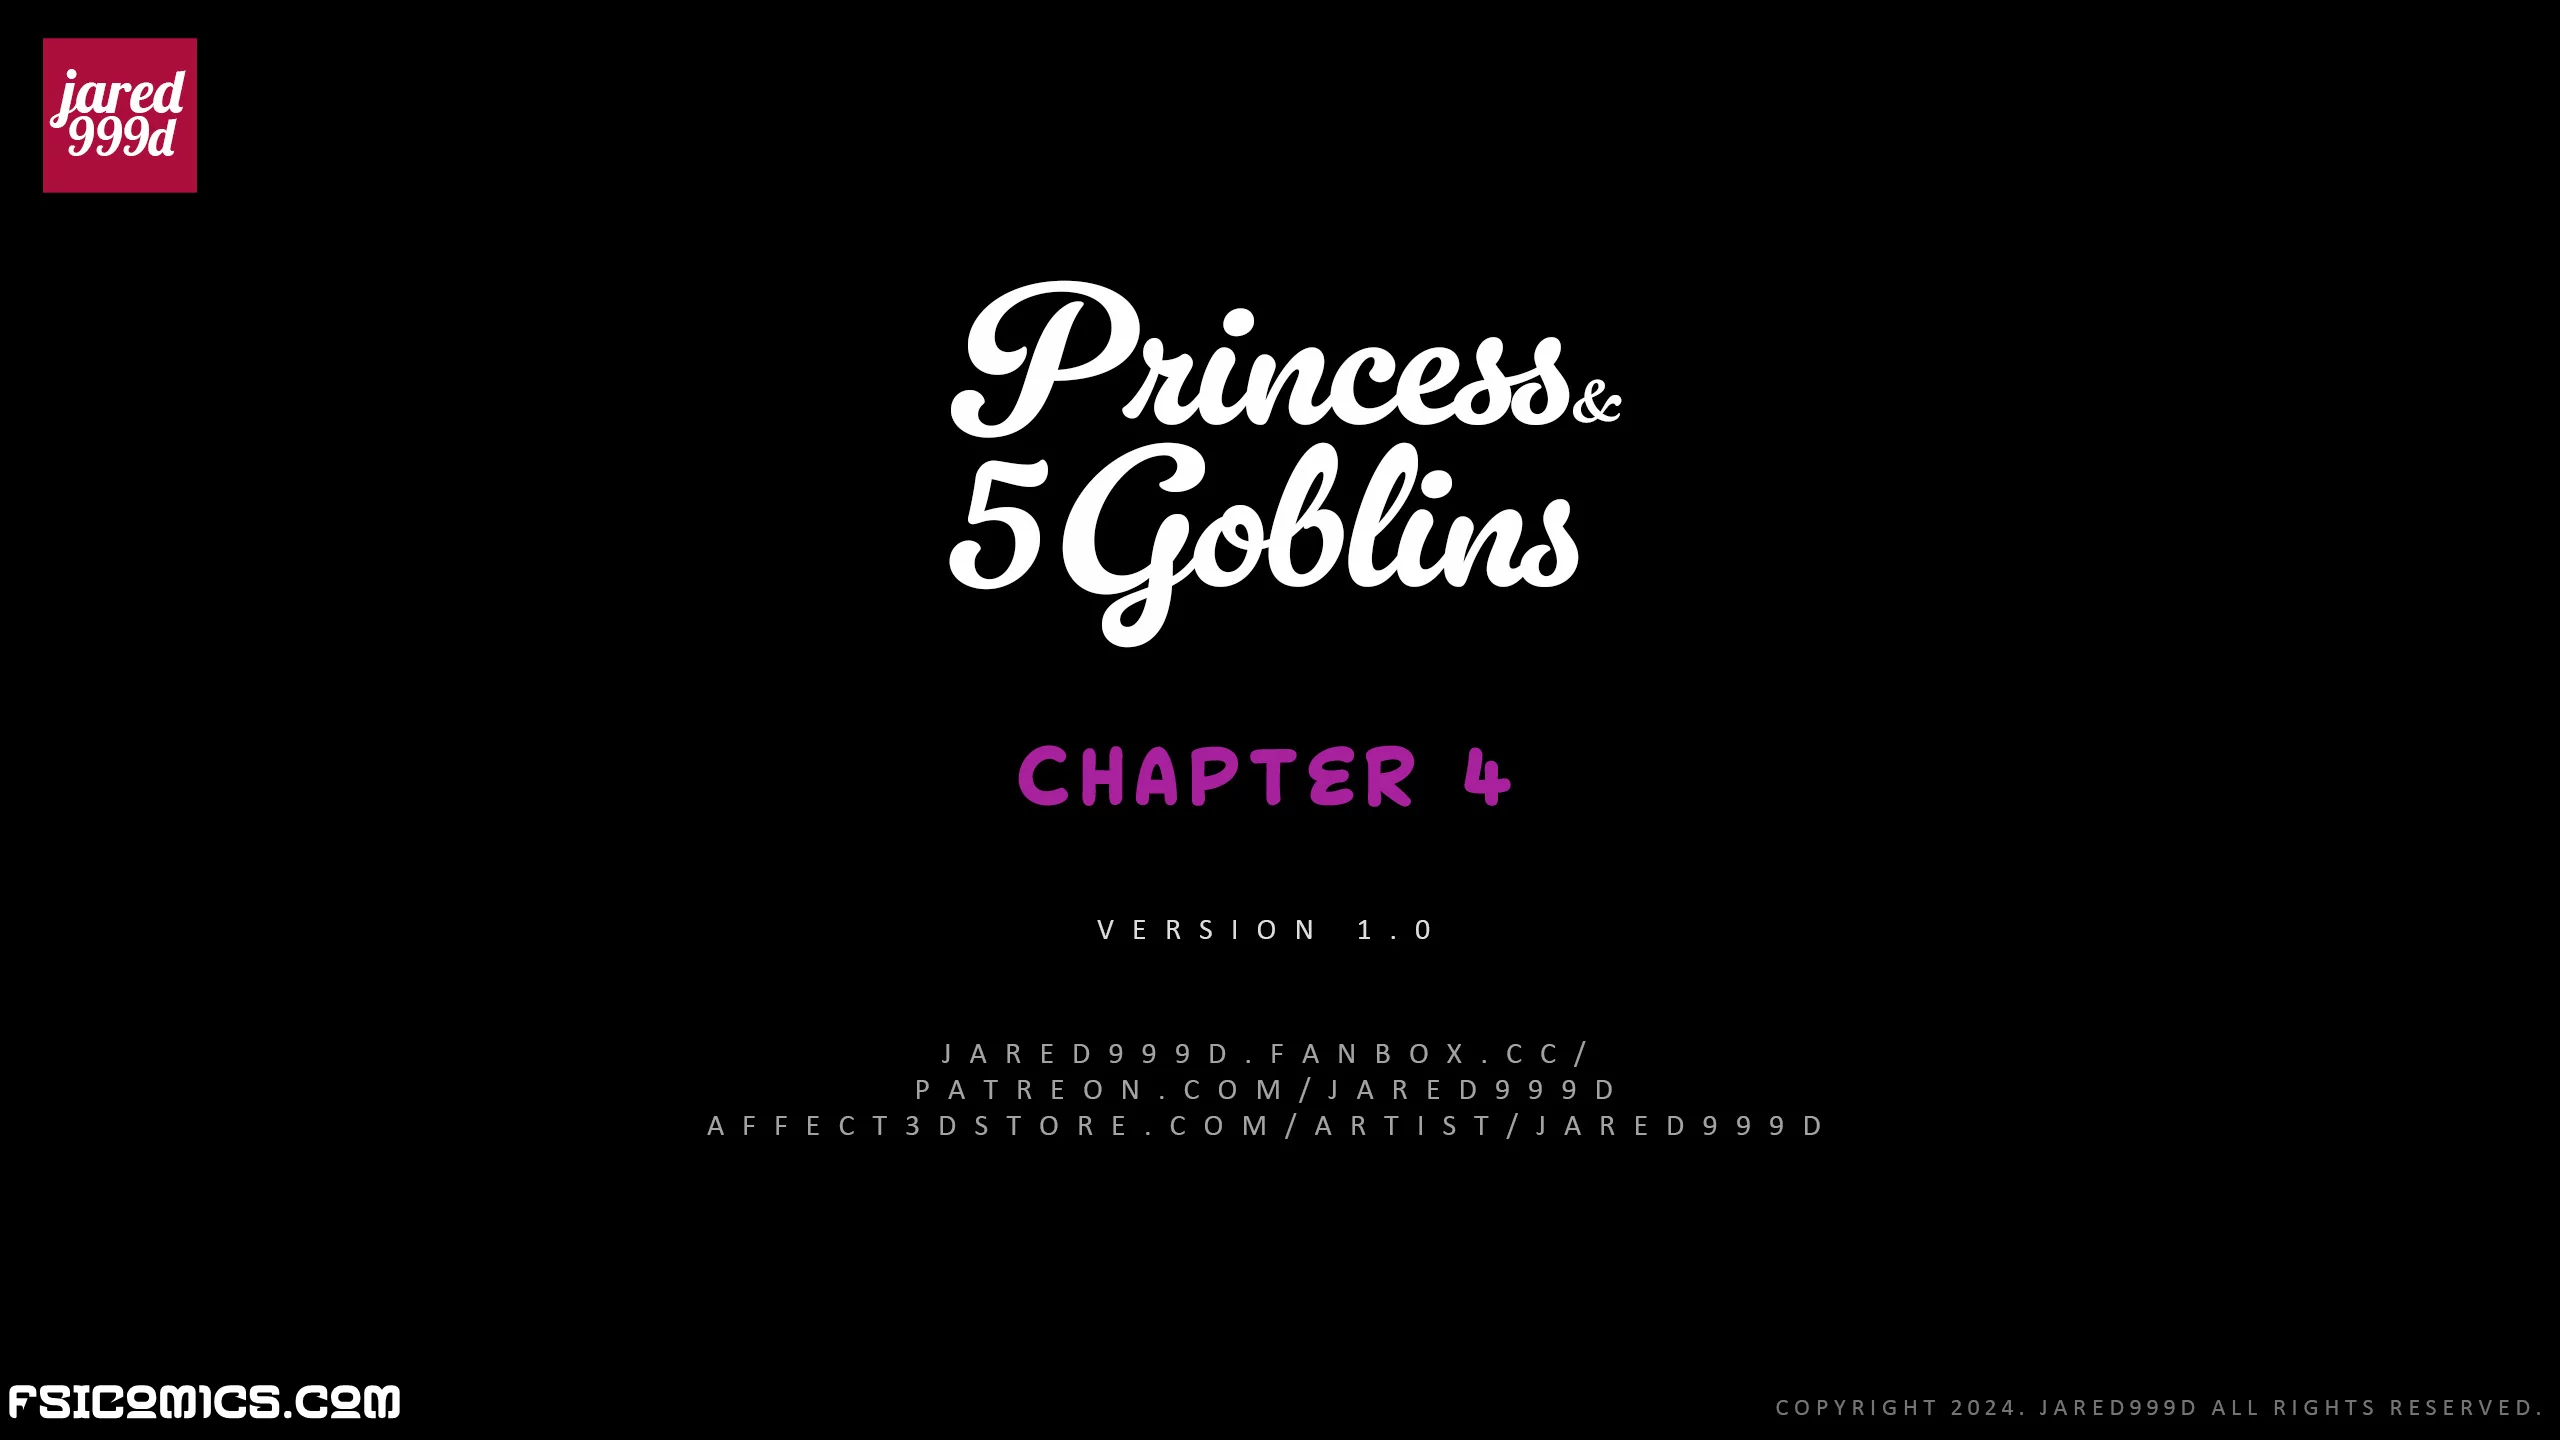 Princess And 5 Goblins Chapter 4 - Jared999D - 19 - FSIComics